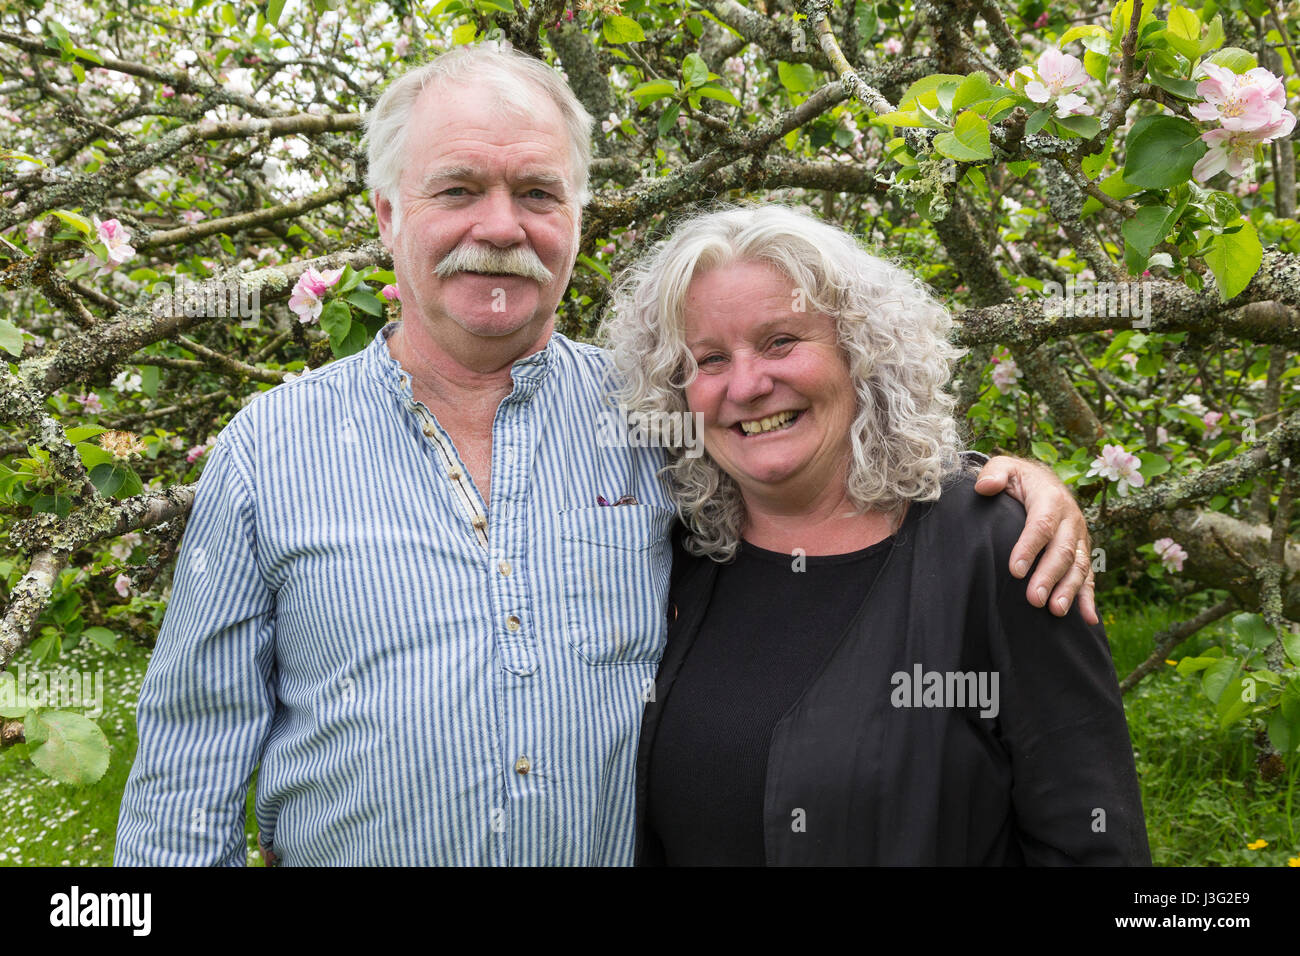 Older couple happy together Stock Photo